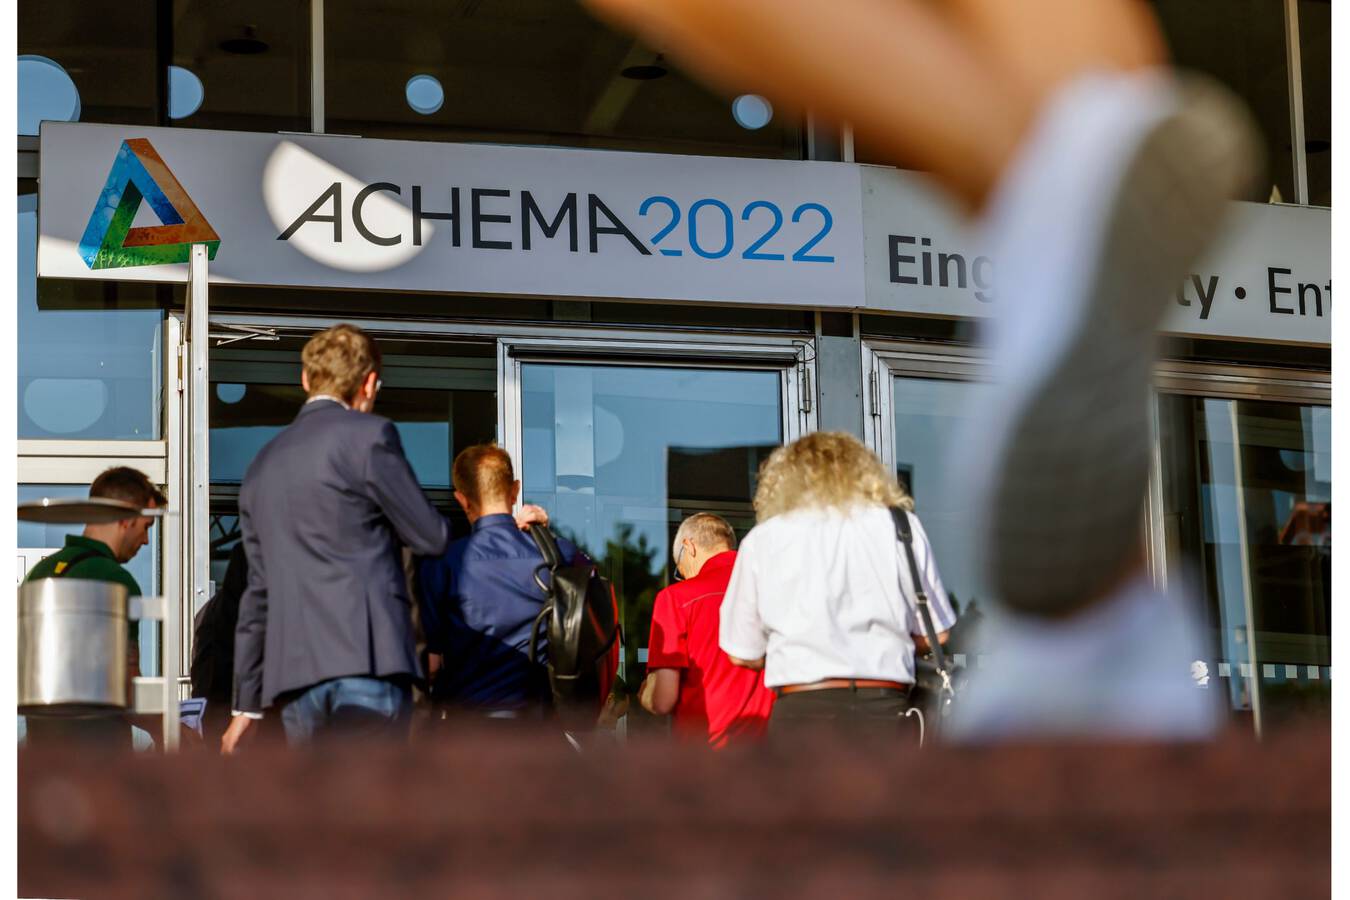 ACHEMA 2022 offers new impulses for the process industry At ACHEMA 2022 over 2,200 exhibitors from more than 50 countries showcased the latest equipment and innovative processes for the chemical, pharmaceutical and food industries at the Frankfurt fairgrounds from 22 to 26 August.